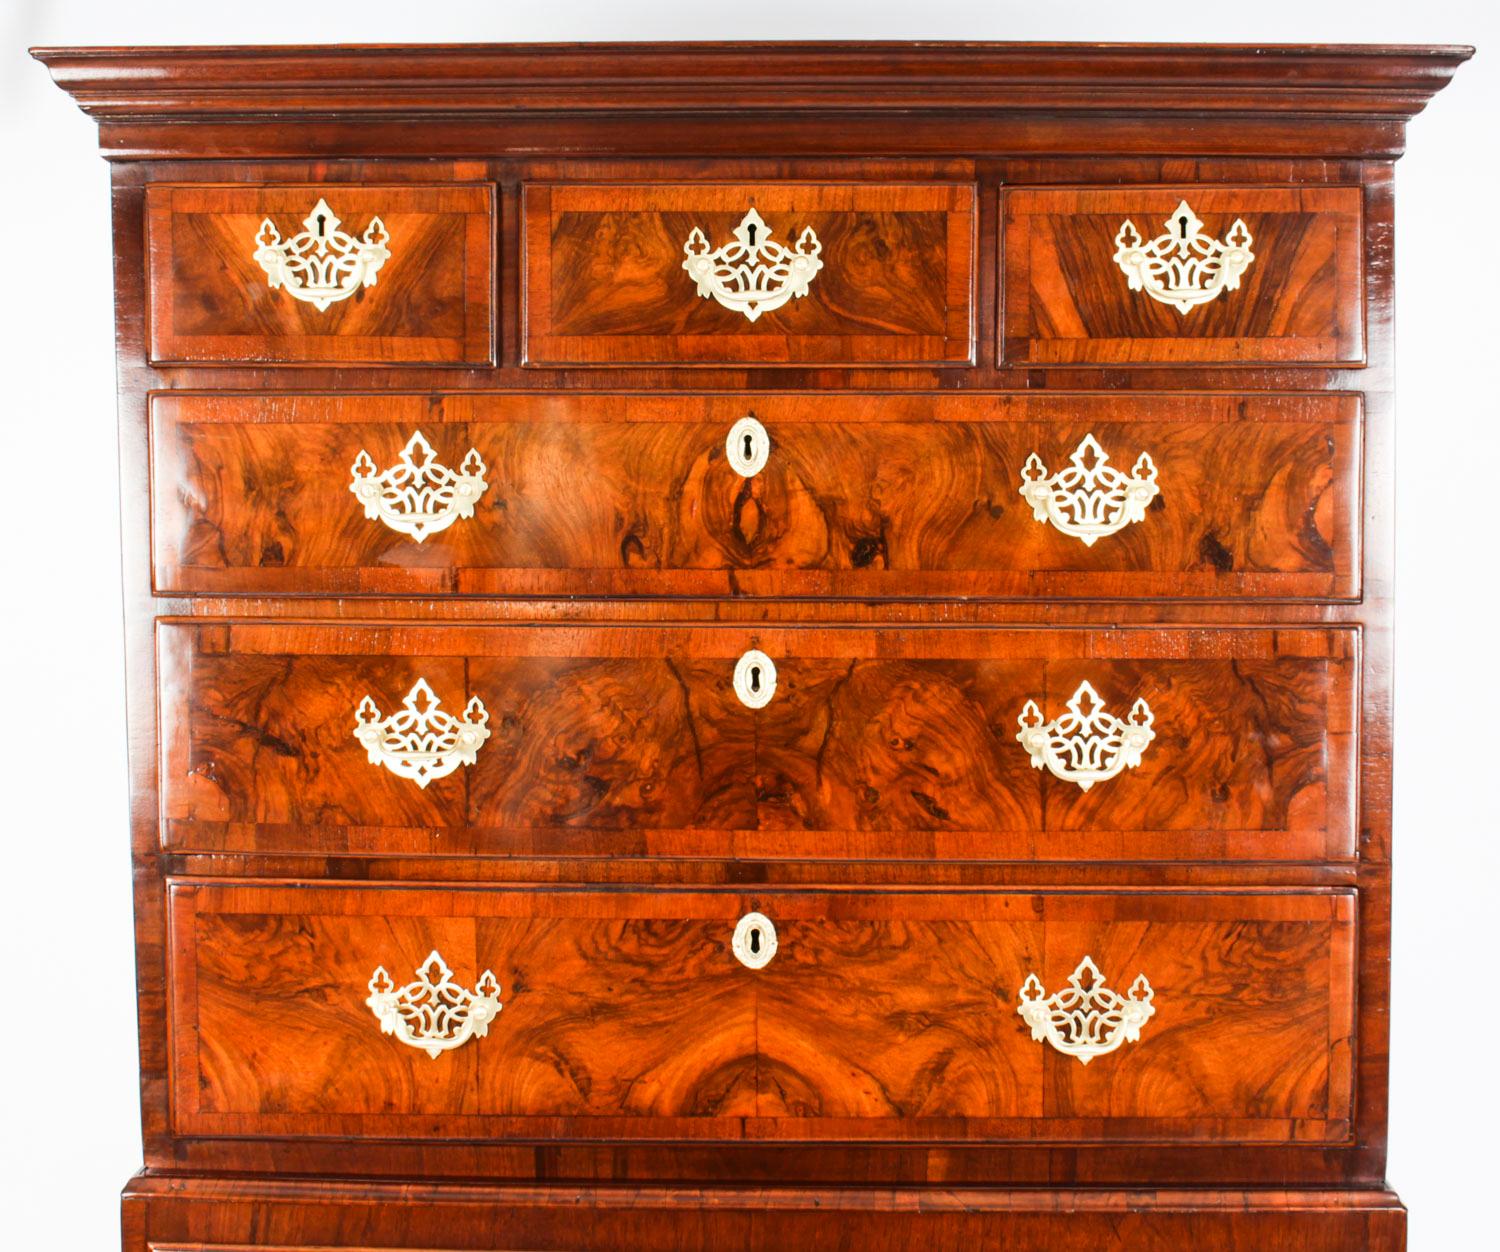 This is a beautiful antique George II walnut and crossbanded chest on chest, circa 1740 in date.

It features a cavetto cornice above three small drawers with six capacious full width drawers below and these provide ample storage. 

The drawers